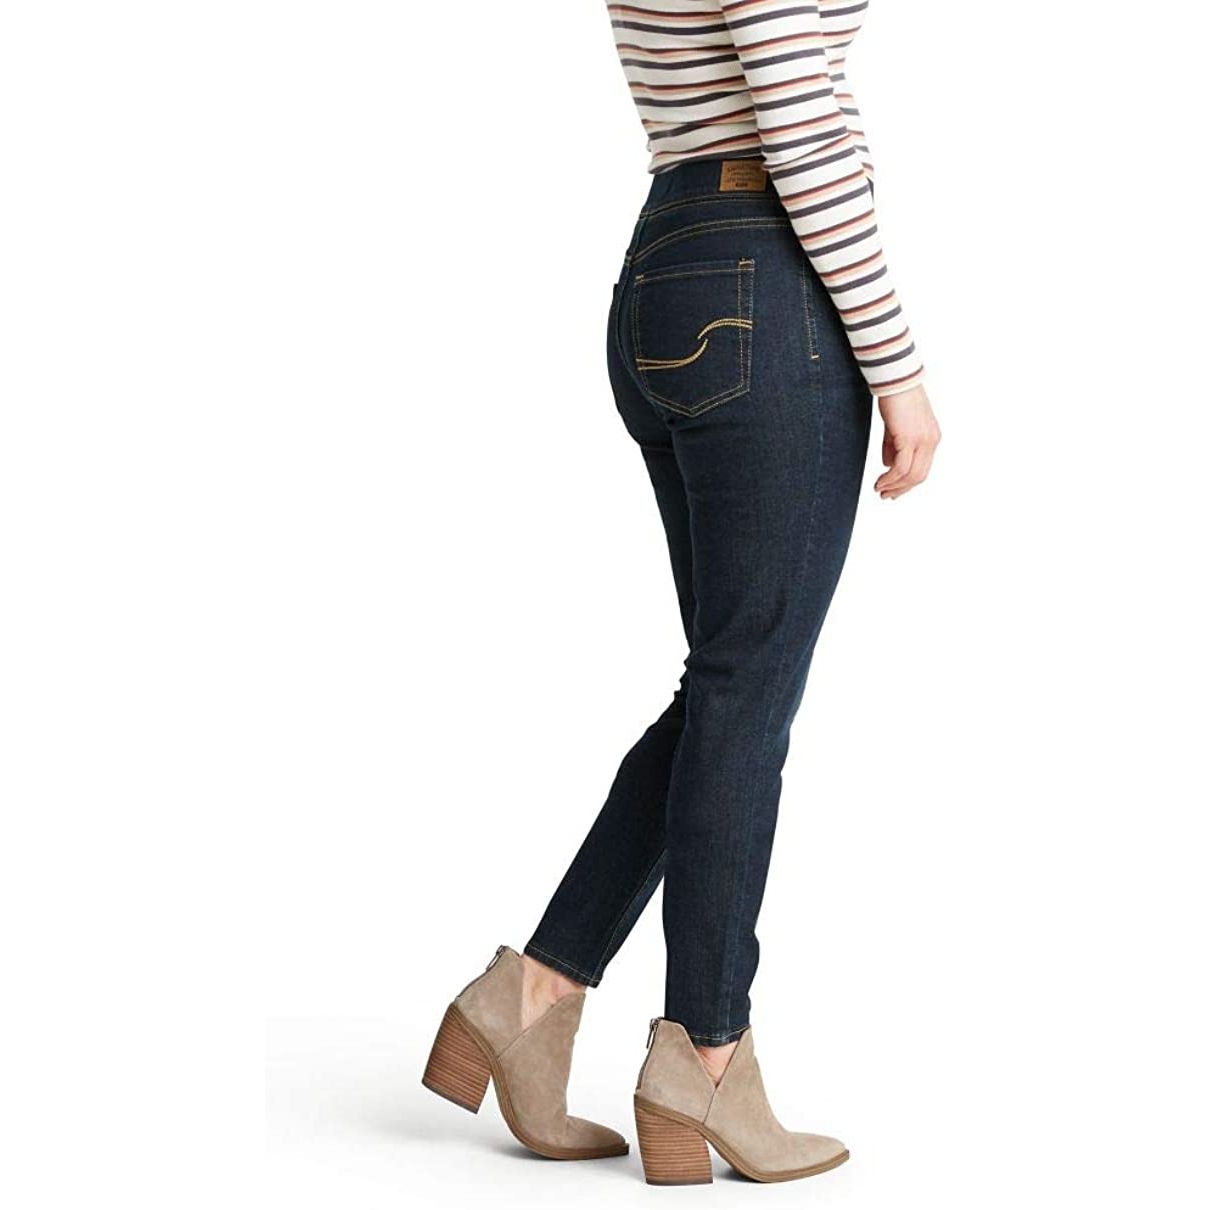 Levi's Pull-On Skinny Jeans: Effortless Style & Comfort